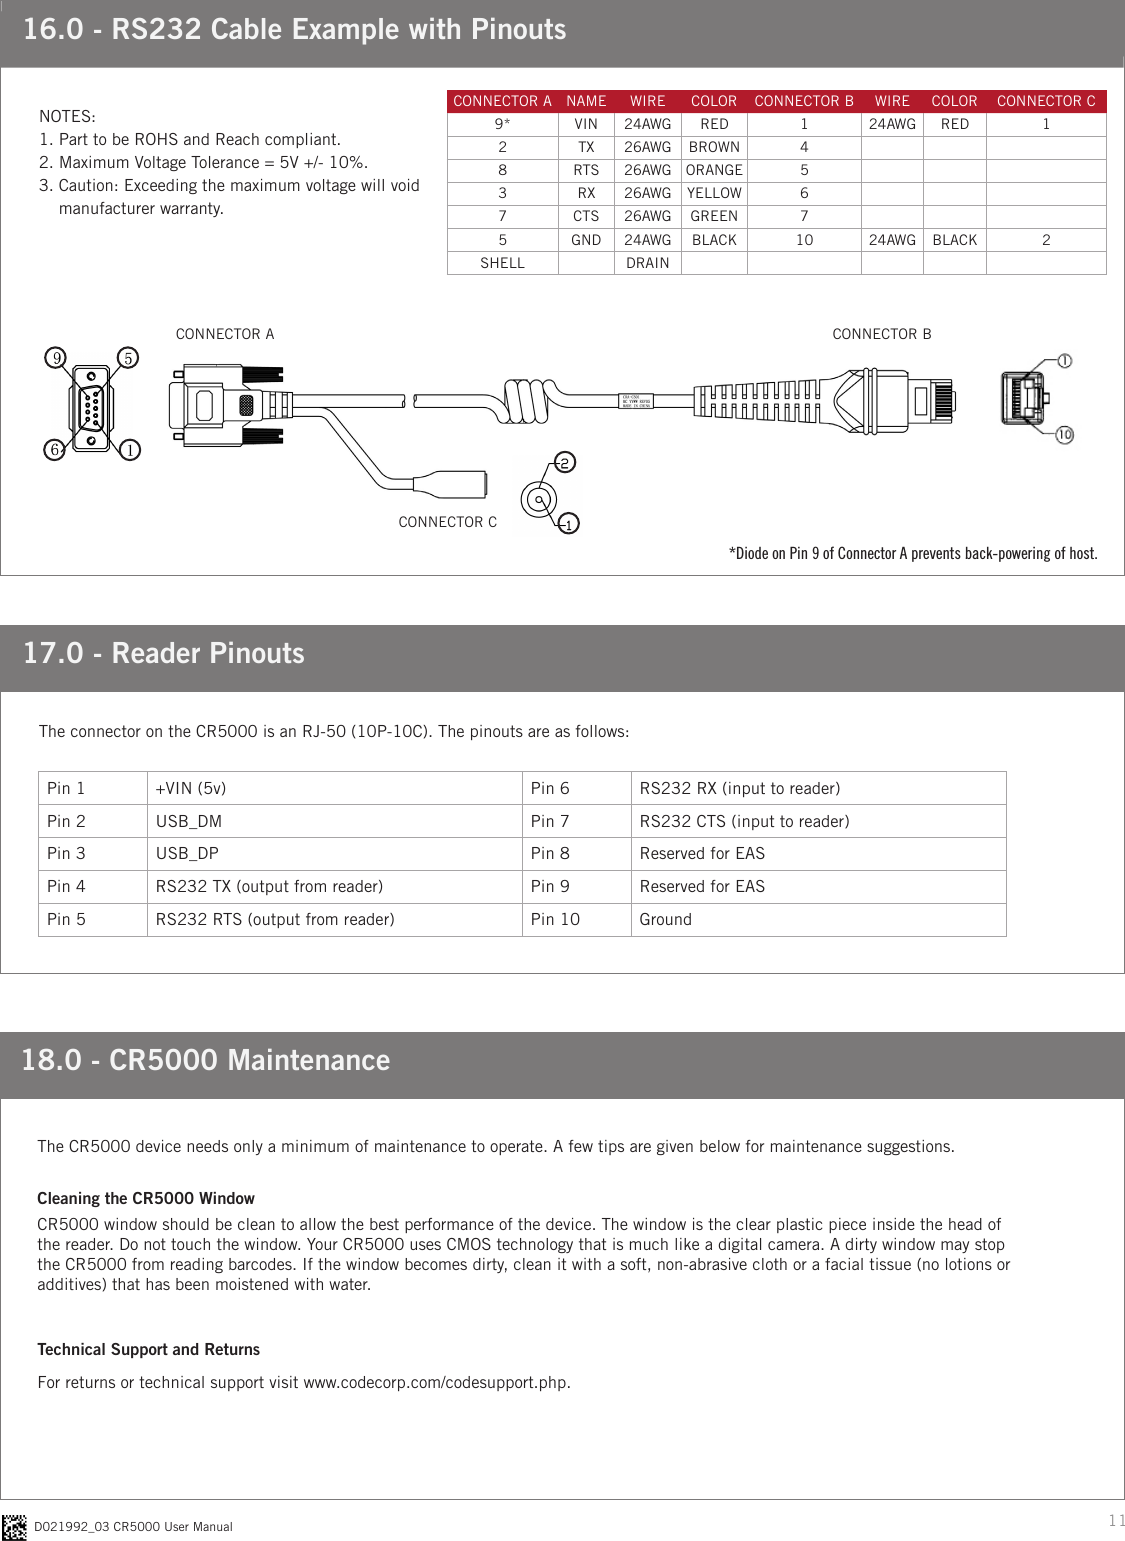 11D021992_03 CR5000 User Manual17.0 - Reader PinoutsThe connector on the CR5000 is an RJ-50 (10P-10C). The pinouts are as follows:Pin 1 +VIN (5v) Pin 6 RS232 RX (input to reader)Pin 2 USB_DM Pin 7 RS232 CTS (input to reader)Pin 3 USB_DP Pin 8 Reserved for EASPin 4 RS232 TX (output from reader) Pin 9 Reserved for EASPin 5 RS232 RTS (output from reader) Pin 10 Ground16.0 - RS232 Cable Example with PinoutsNOTES:1. Part to be ROHS and Reach compliant. 2. Maximum Voltage Tolerance = 5V +/- 10%. 3.  Caution: Exceeding the maximum voltage will void  manufacturer warranty.CONNECTOR A NAME WIRE COLOR CONNECTOR B WIRE COLOR CONNECTOR C9* VIN 24AWG RED 1 24AWG RED 12 TX 26AWG BROWN 48RTS 26AWG  ORANGE 53 RX 26AWG  YELLOW 67 CTS 26AWG  GREEN 75 GND 24AWG BLACK 10 24AWG BLACK 2SHELL DRAINCONNECTOR A CONNECTOR BCONNECTOR C*Diode on Pin 9 of Connector A prevents back-powering of host.18.0 - CR5000 MaintenanceThe CR5000 device needs only a minimum of maintenance to operate. A few tips are given below for maintenance suggestions. Cleaning the CR5000 WindowCR5000 window should be clean to allow the best performance of the device. The window is the clear plastic piece inside the head of the reader. Do not touch the window. Your CR5000 uses CMOS technology that is much like a digital camera. A dirty window may stop the CR5000 from reading barcodes. If the window becomes dirty, clean it with a soft, non-abrasive cloth or a facial tissue (no lotions or additives) that has been moistened with water. Technical Support and ReturnsFor returns or technical support visit www.codecorp.com/codesupport.php.